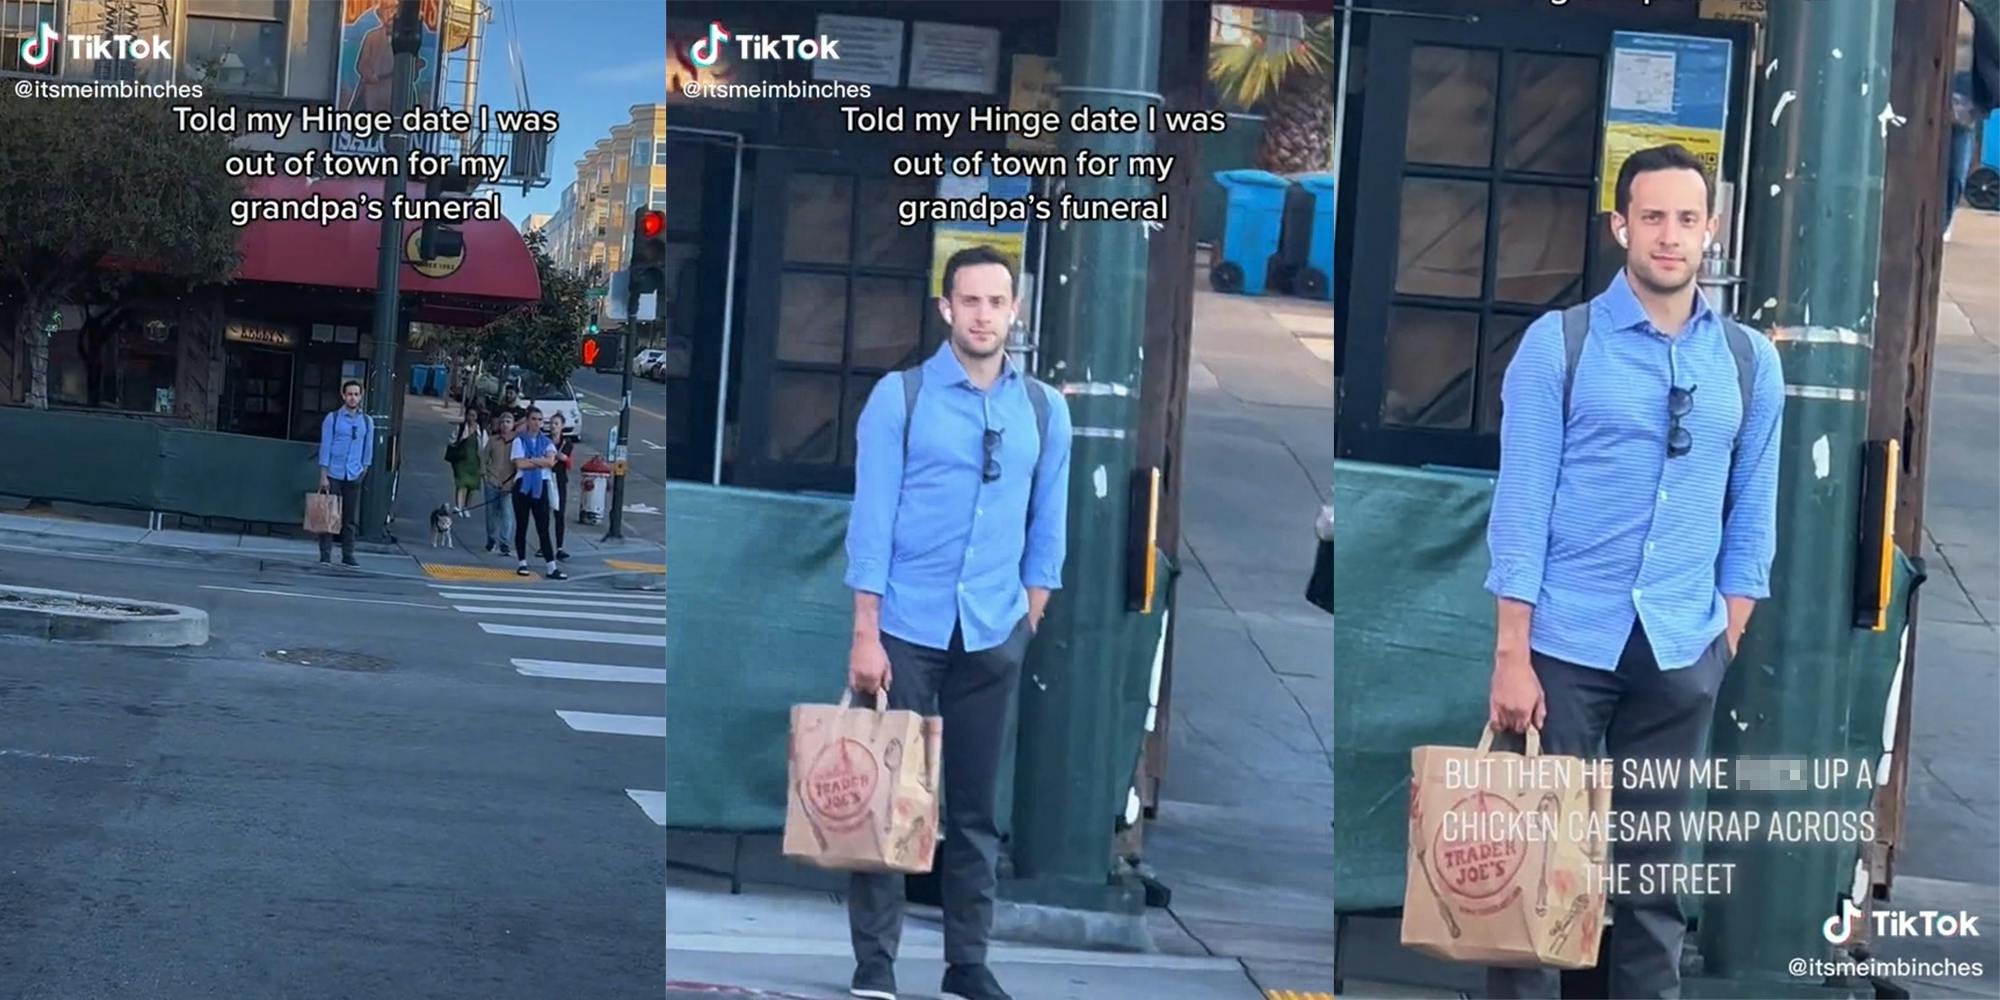 man standing on sidewalk with caption "told my hinge date i was out of town for my grandpa's funeral" (l&c) caption "But then he saw me fuck up a chicken caesar wrap across the street" (r)